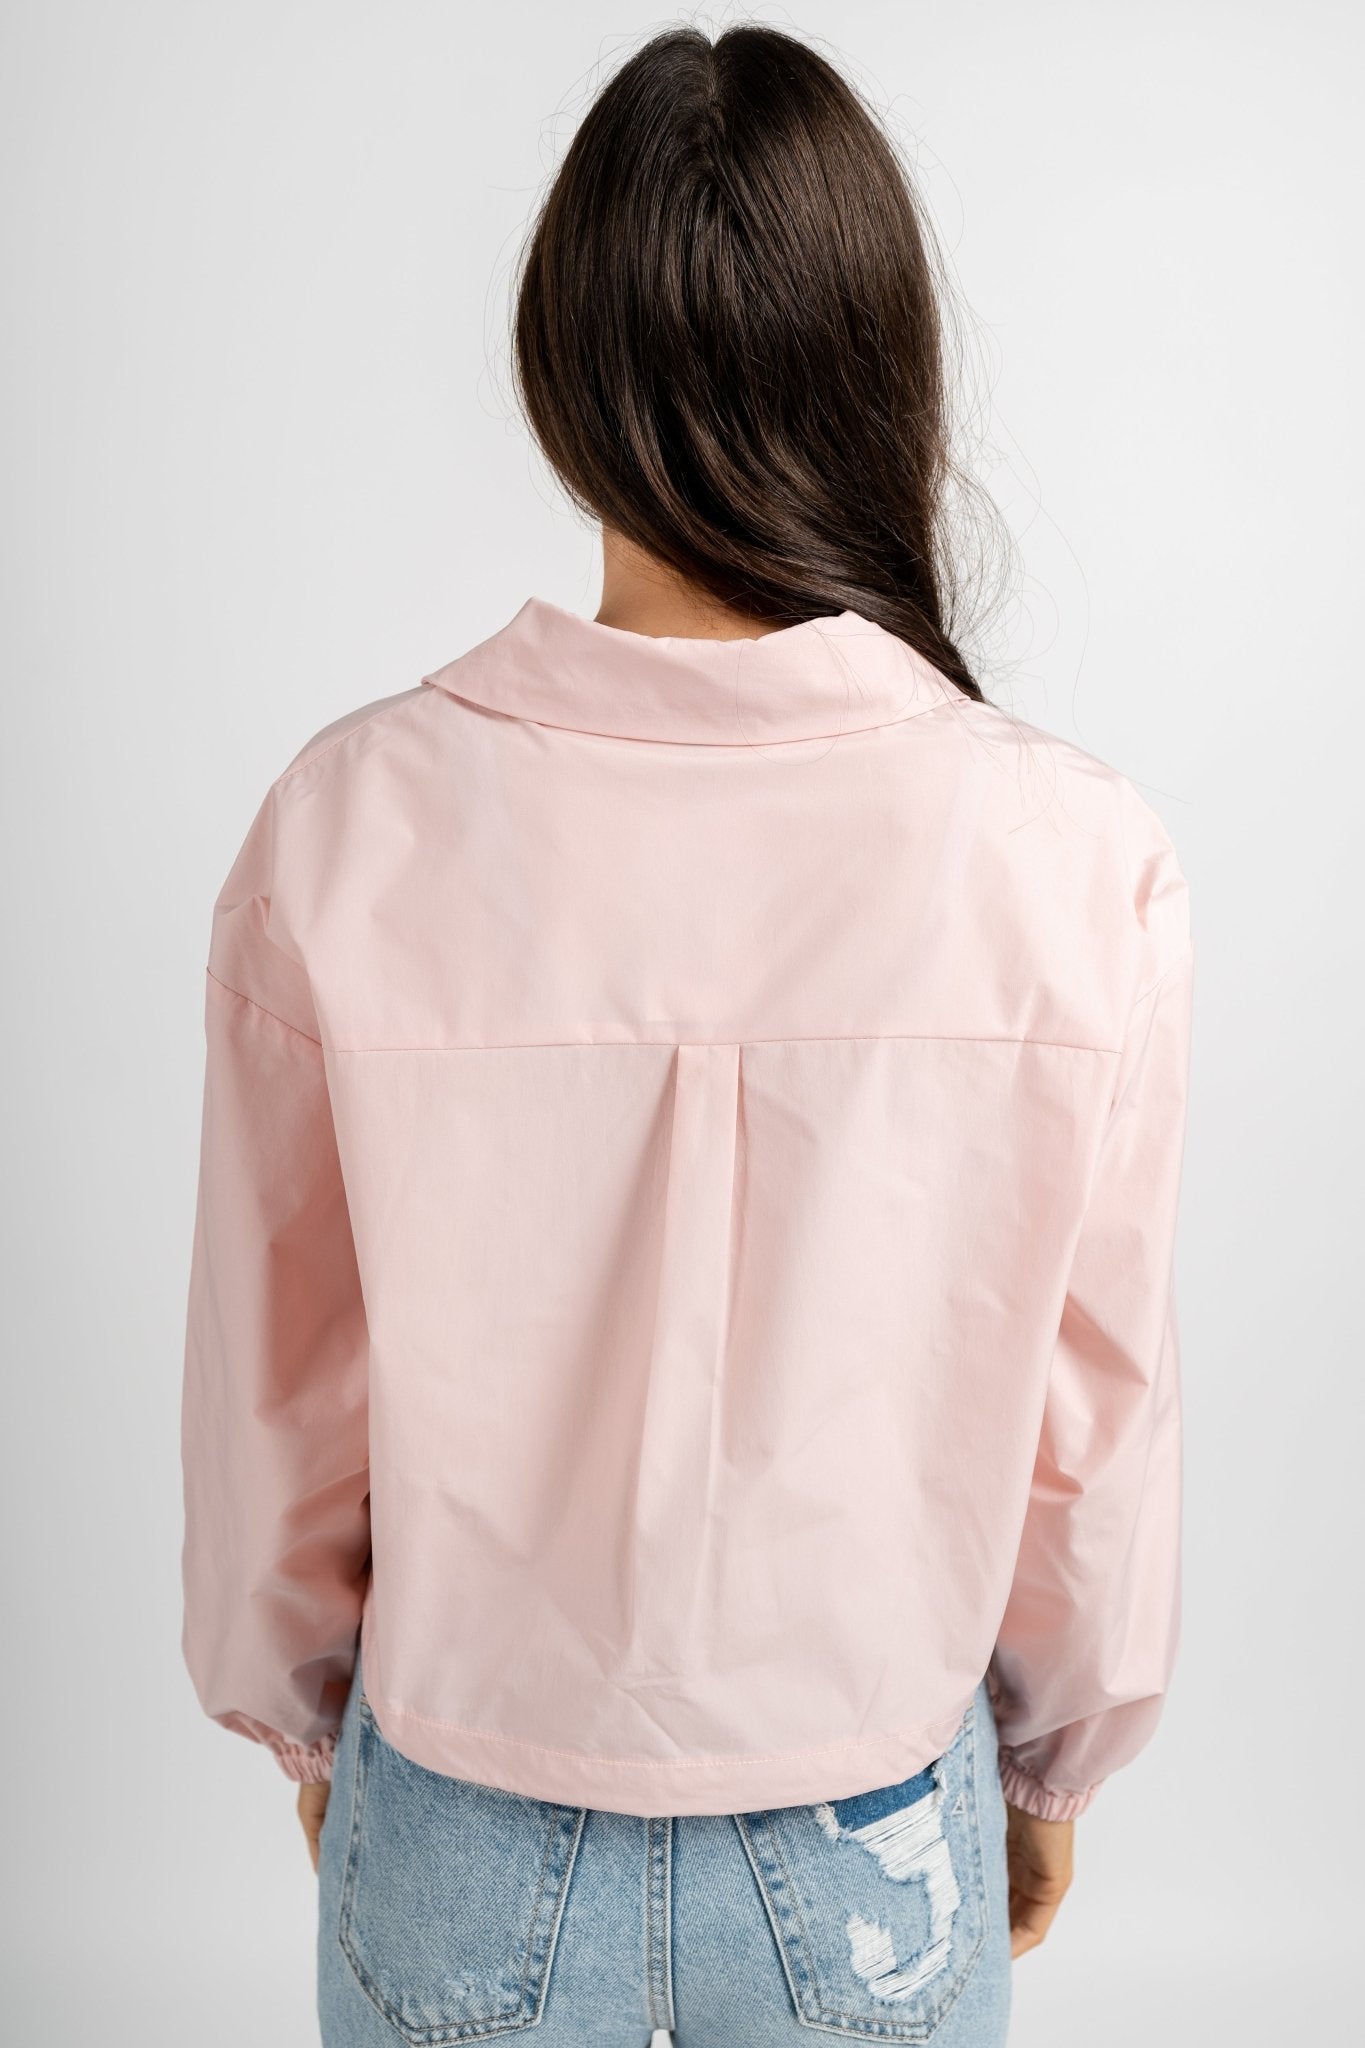 Windbreaker zip jacket baby pink – Unique Blazers | Cute Blazers For Women at Lush Fashion Lounge Boutique in Oklahoma City